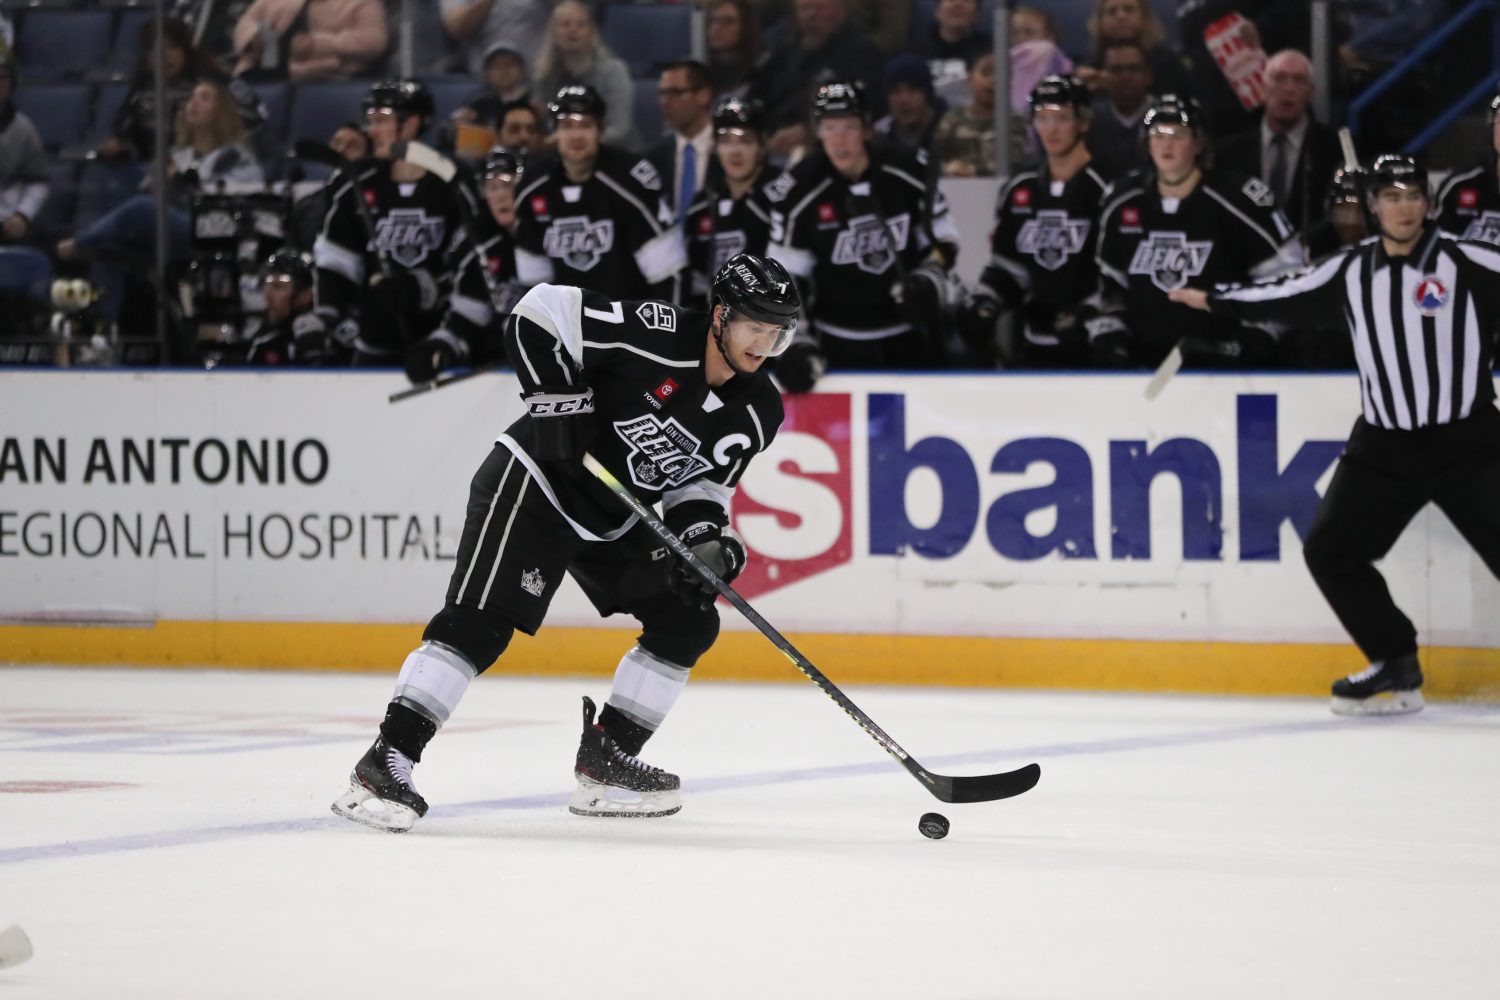 REIGN PREVIEW – Ontario at Coachella Valley, 4/12 - LA Kings Insider